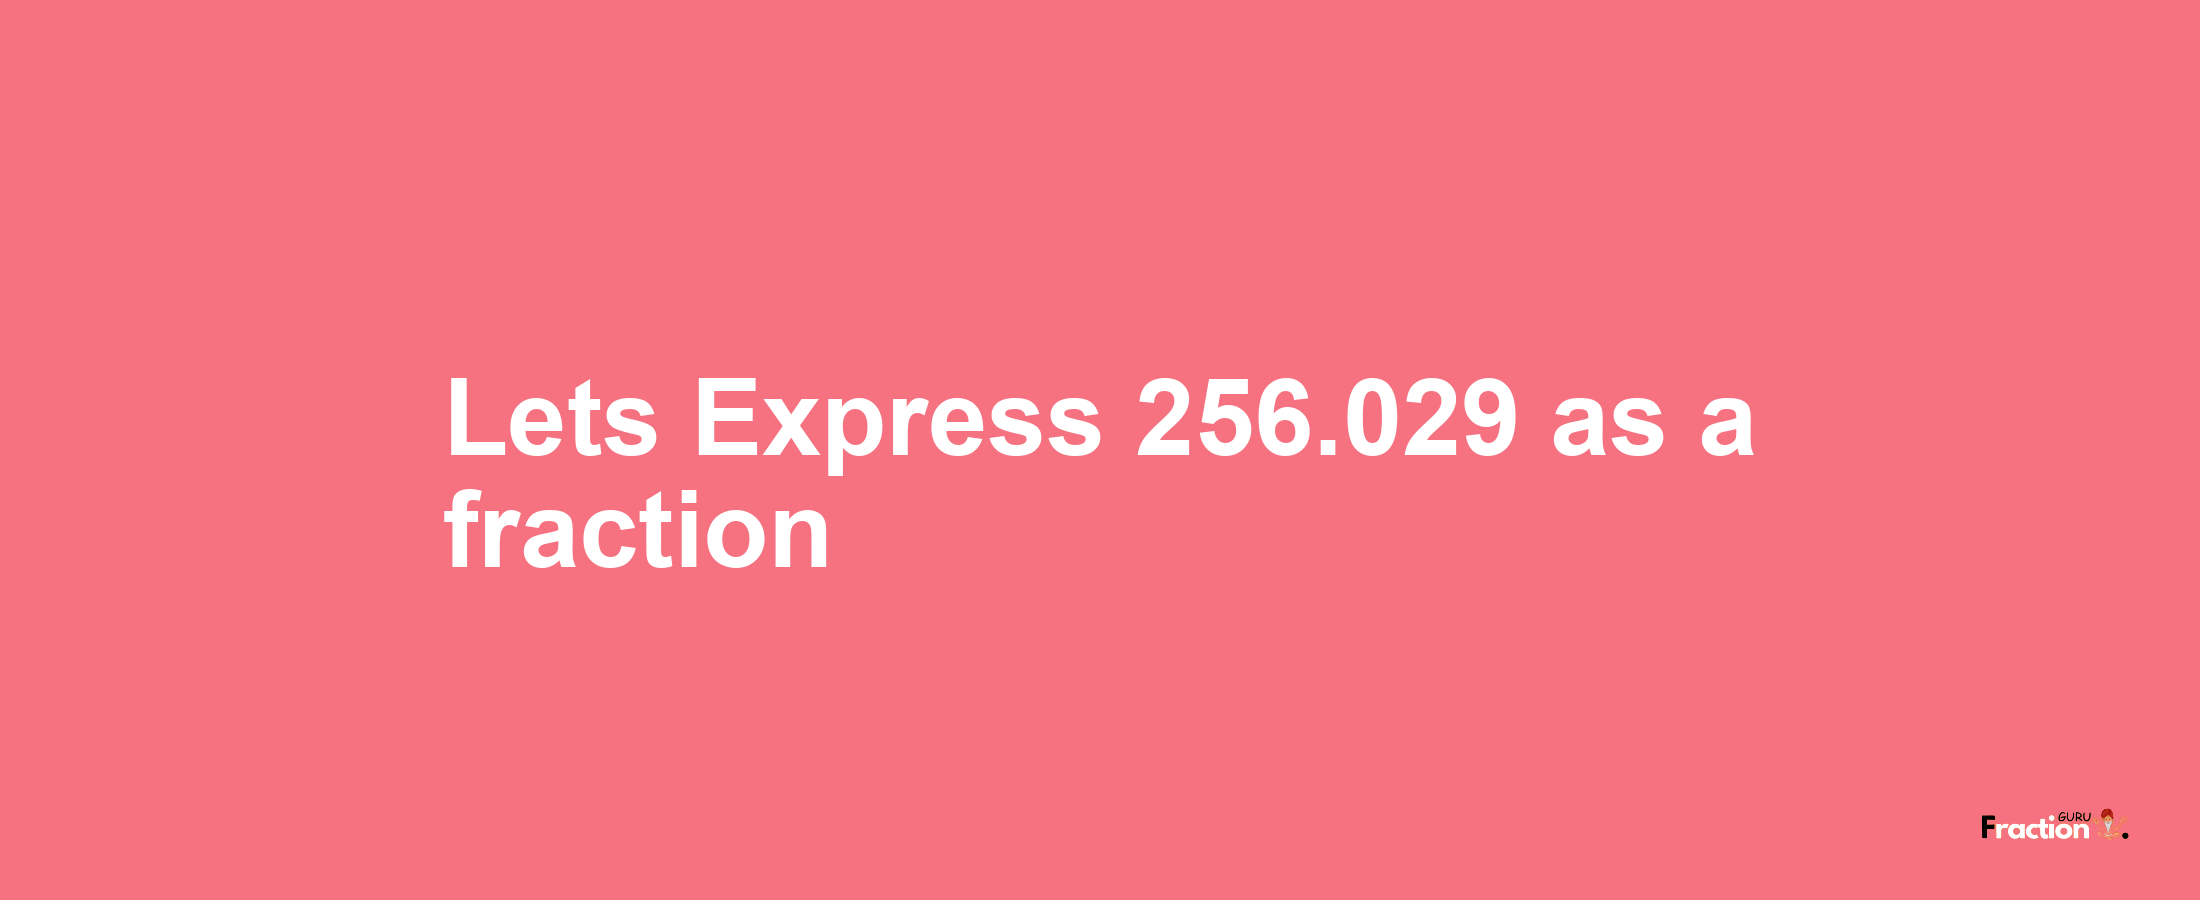 Lets Express 256.029 as afraction